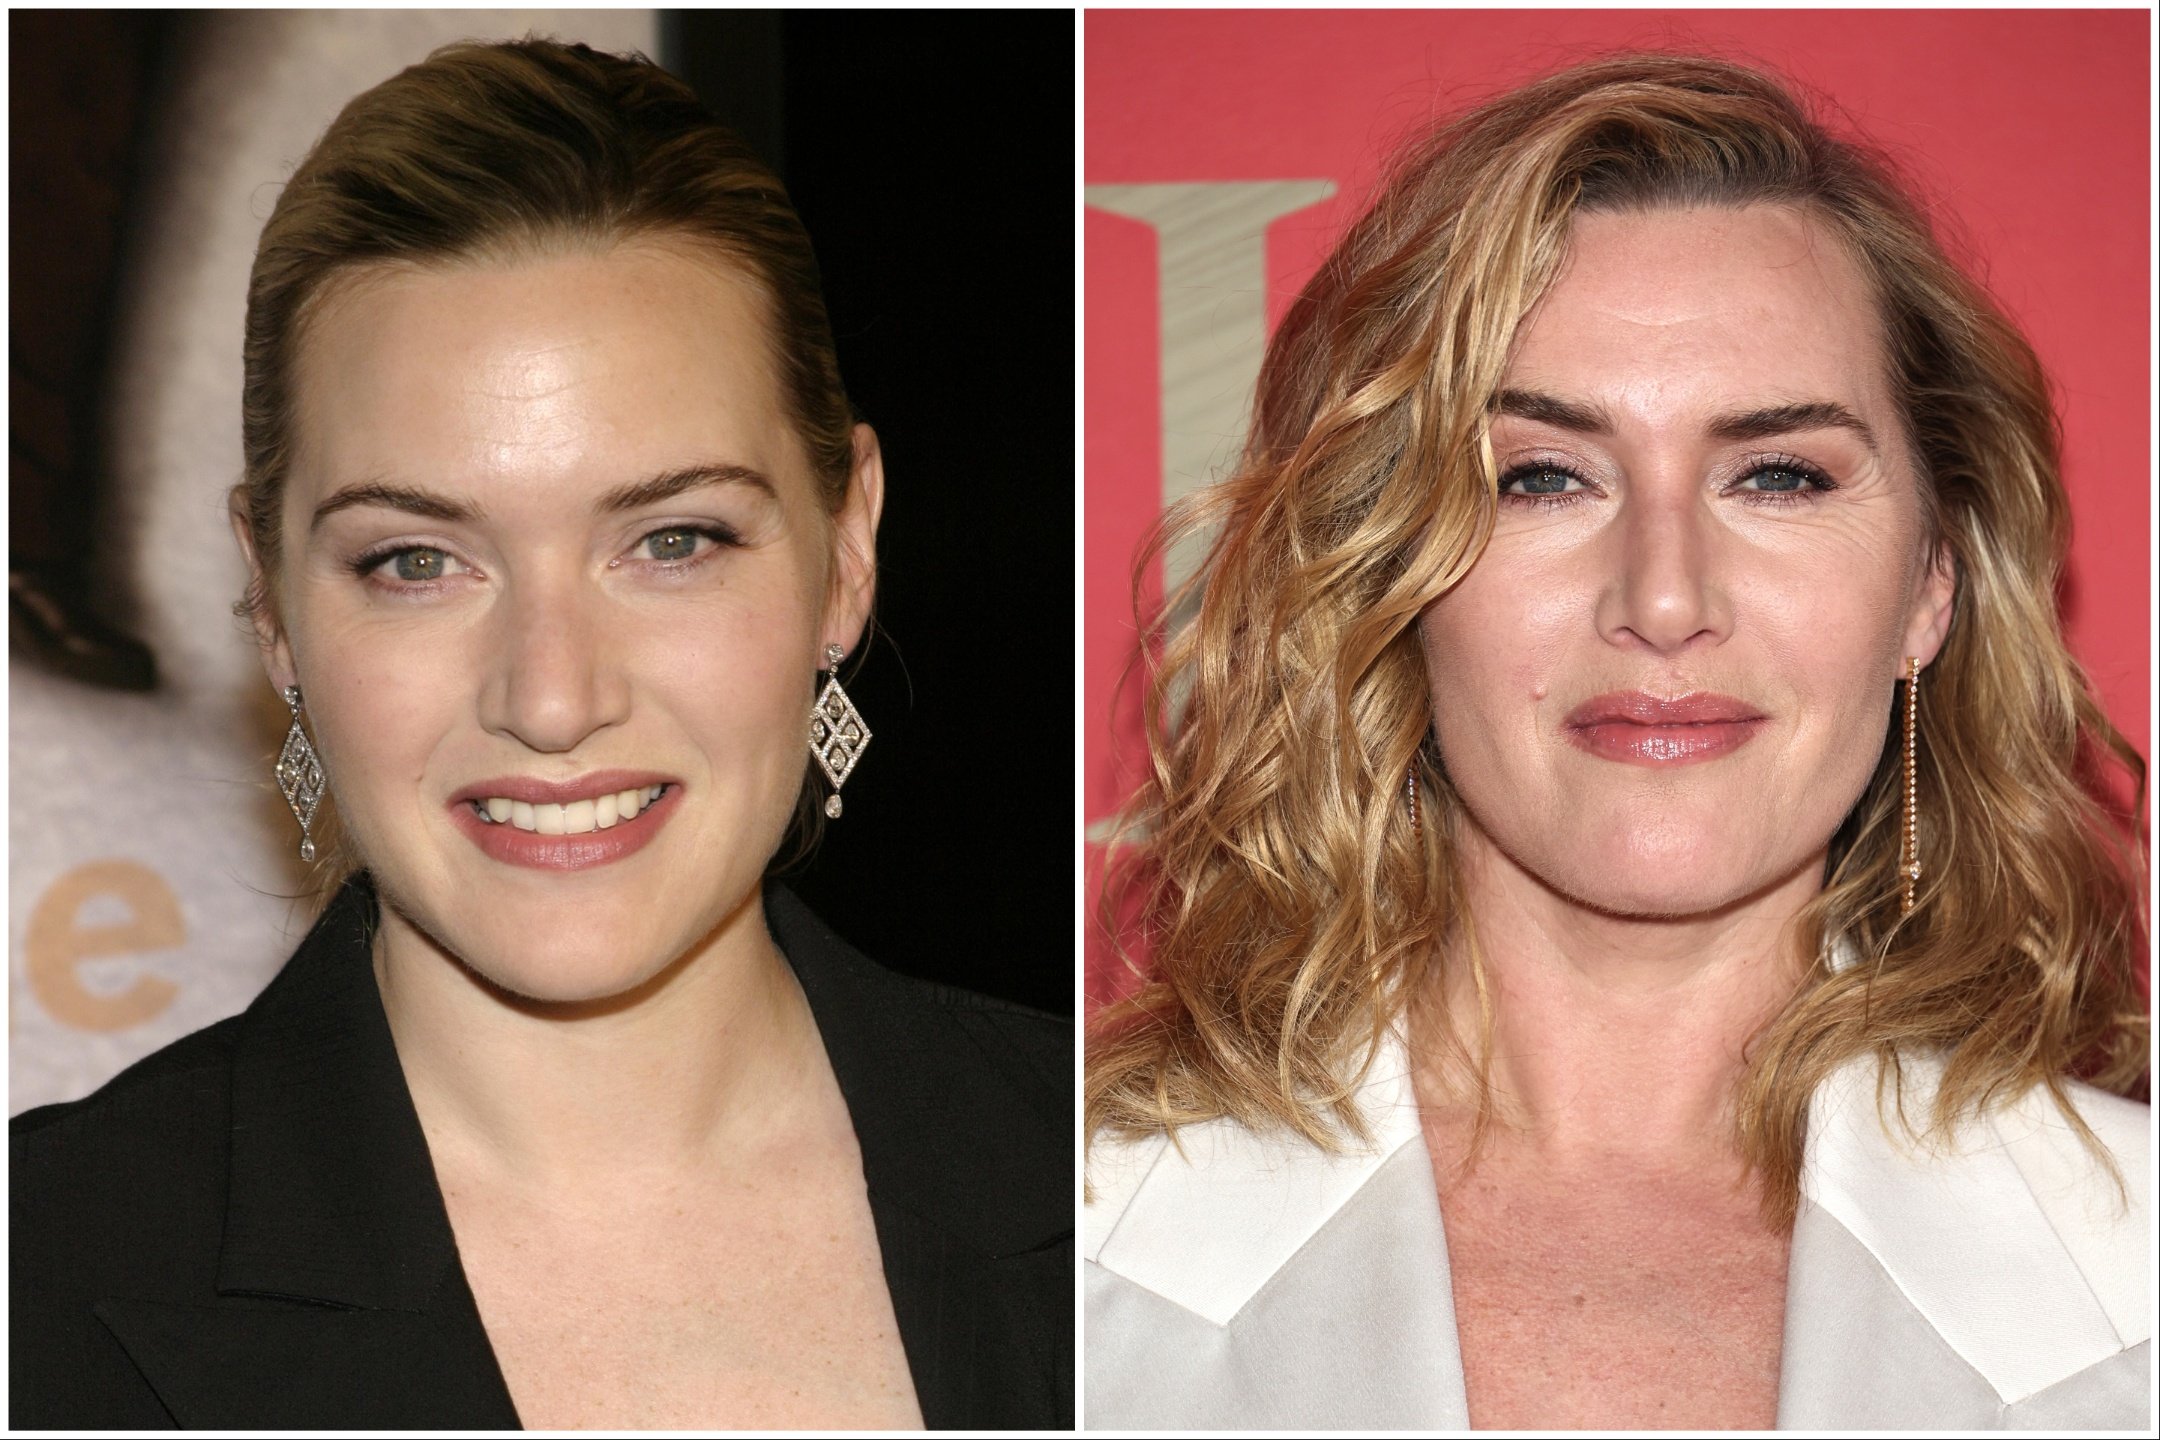 'Eternal Sunshine of the Spotless Mind' cast member Kate Winslet in 2004 and 2024